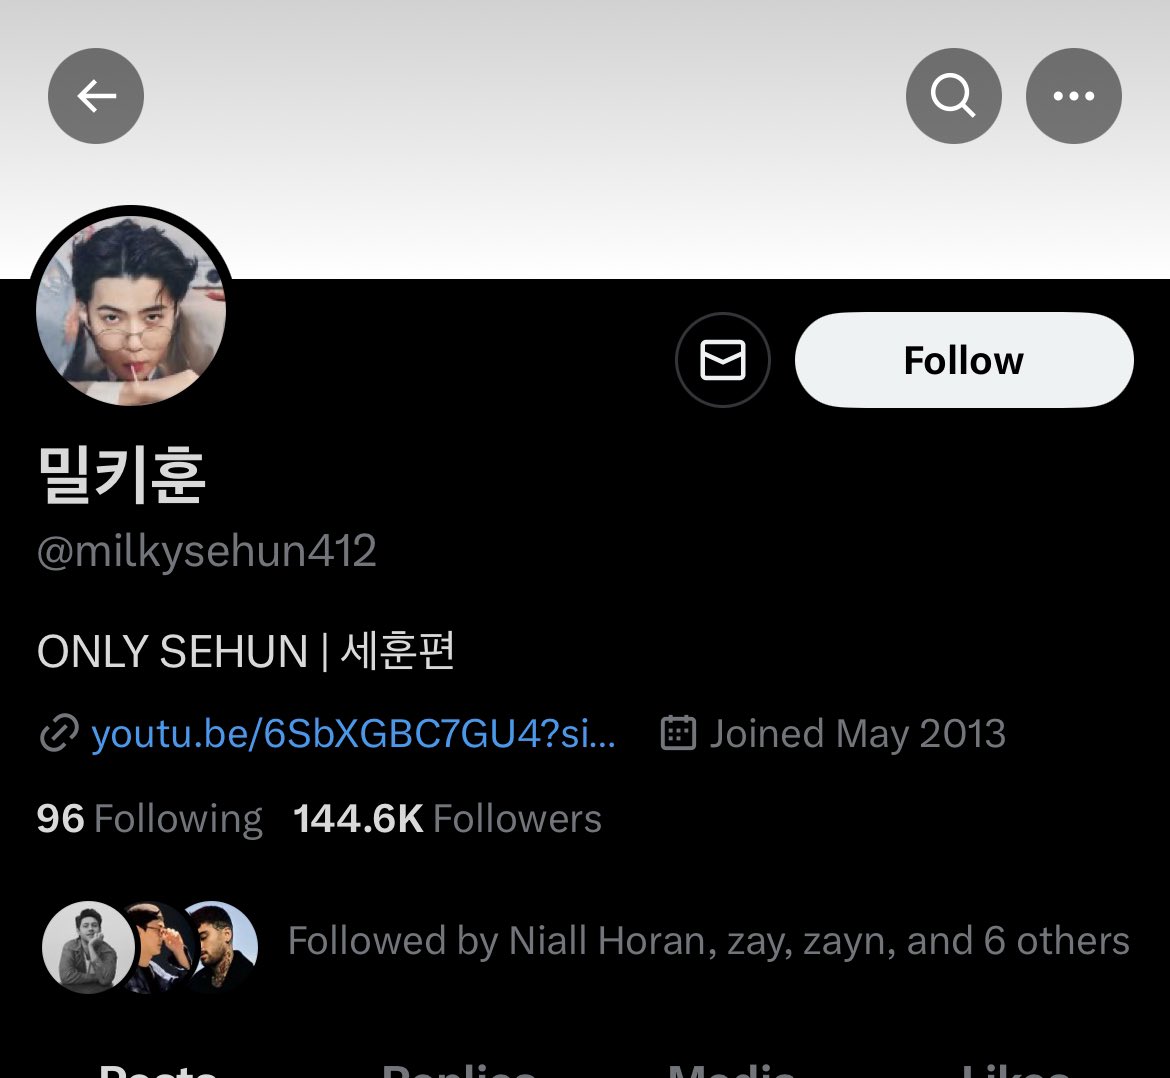 EH? ZAYN AND NIALL ARE FOLLOWING THIS SEHUN ACCOUNT? 😭